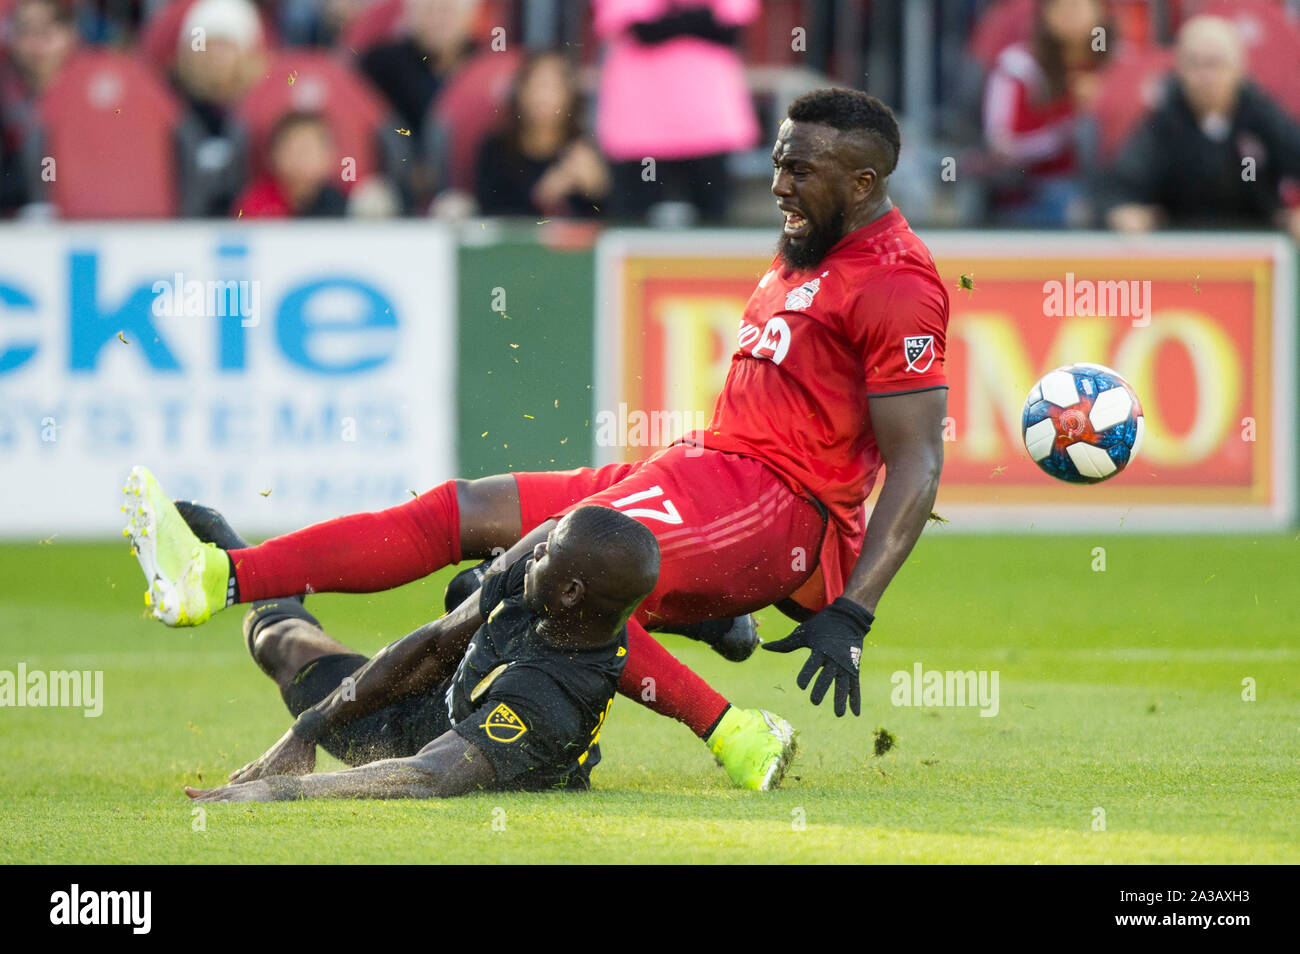 Toronto, Canada. 6th Oct, 2019. Jozy Altidore (R) of Toronto FC vies with Jonathan Mensah of Columbus Crew SC during their 2019 Major League Soccer (MLS) match at BMO Field in Toronto, Canada, Oct. 6, 2019. Credit: Zou Zheng/Xinhua/Alamy Live News Stock Photo